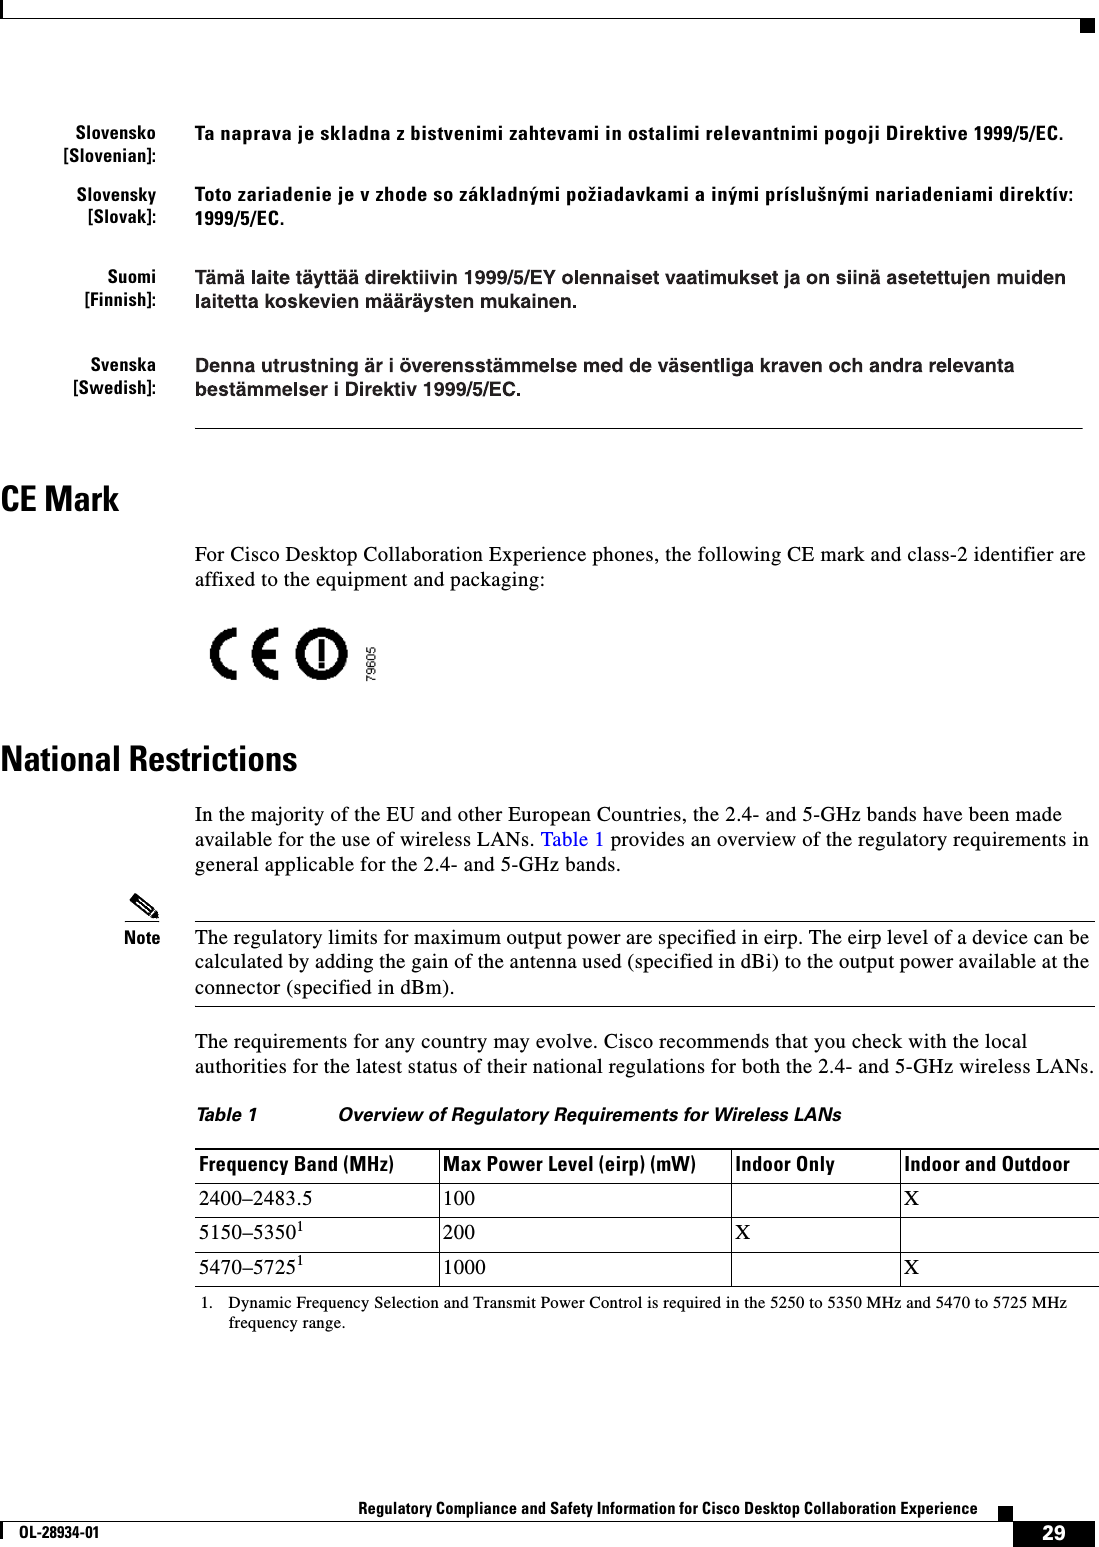  29Regulatory Compliance and Safety Information for Cisco Desktop Collaboration ExperienceOL-28934-01CE MarkFor Cisco Desktop Collaboration Experience phones, the following CE mark and class-2 identifier are affixed to the equipment and packaging:National RestrictionsIn the majority of the EU and other European Countries, the 2.4- and 5-GHz bands have been made available for the use of wireless LANs. Table 1 provides an overview of the regulatory requirements in general applicable for the 2.4- and 5-GHz bands.Note The regulatory limits for maximum output power are specified in eirp. The eirp level of a device can be calculated by adding the gain of the antenna used (specified in dBi) to the output power available at the connector (specified in dBm).The requirements for any country may evolve. Cisco recommends that you check with the local authorities for the latest status of their national regulations for both the 2.4- and 5-GHz wireless LANs.Slovensko[Slovenian]:Ta naprava je skladna z bistvenimi zahtevami in ostalimi relevantnimi pogoji Direktive 1999/5/EC.Slovensky[Slovak]:Toto zariadenie je v zhode so základnými požiadavkami a inými príslušnými nariadeniami direktív: 1999/5/EC. Suomi[Finnish]:Svenska[Swedish]:Table 1 Overview of Regulatory Requirements for Wireless LANsFrequency Band (MHz) Max Power Level (eirp) (mW) Indoor Only Indoor and Outdoor2400–2483.5 100 X5150–535011. Dynamic Frequency Selection and Transmit Power Control is required in the 5250 to 5350 MHz and 5470 to 5725 MHz frequency range.200 X5470–572511000 X